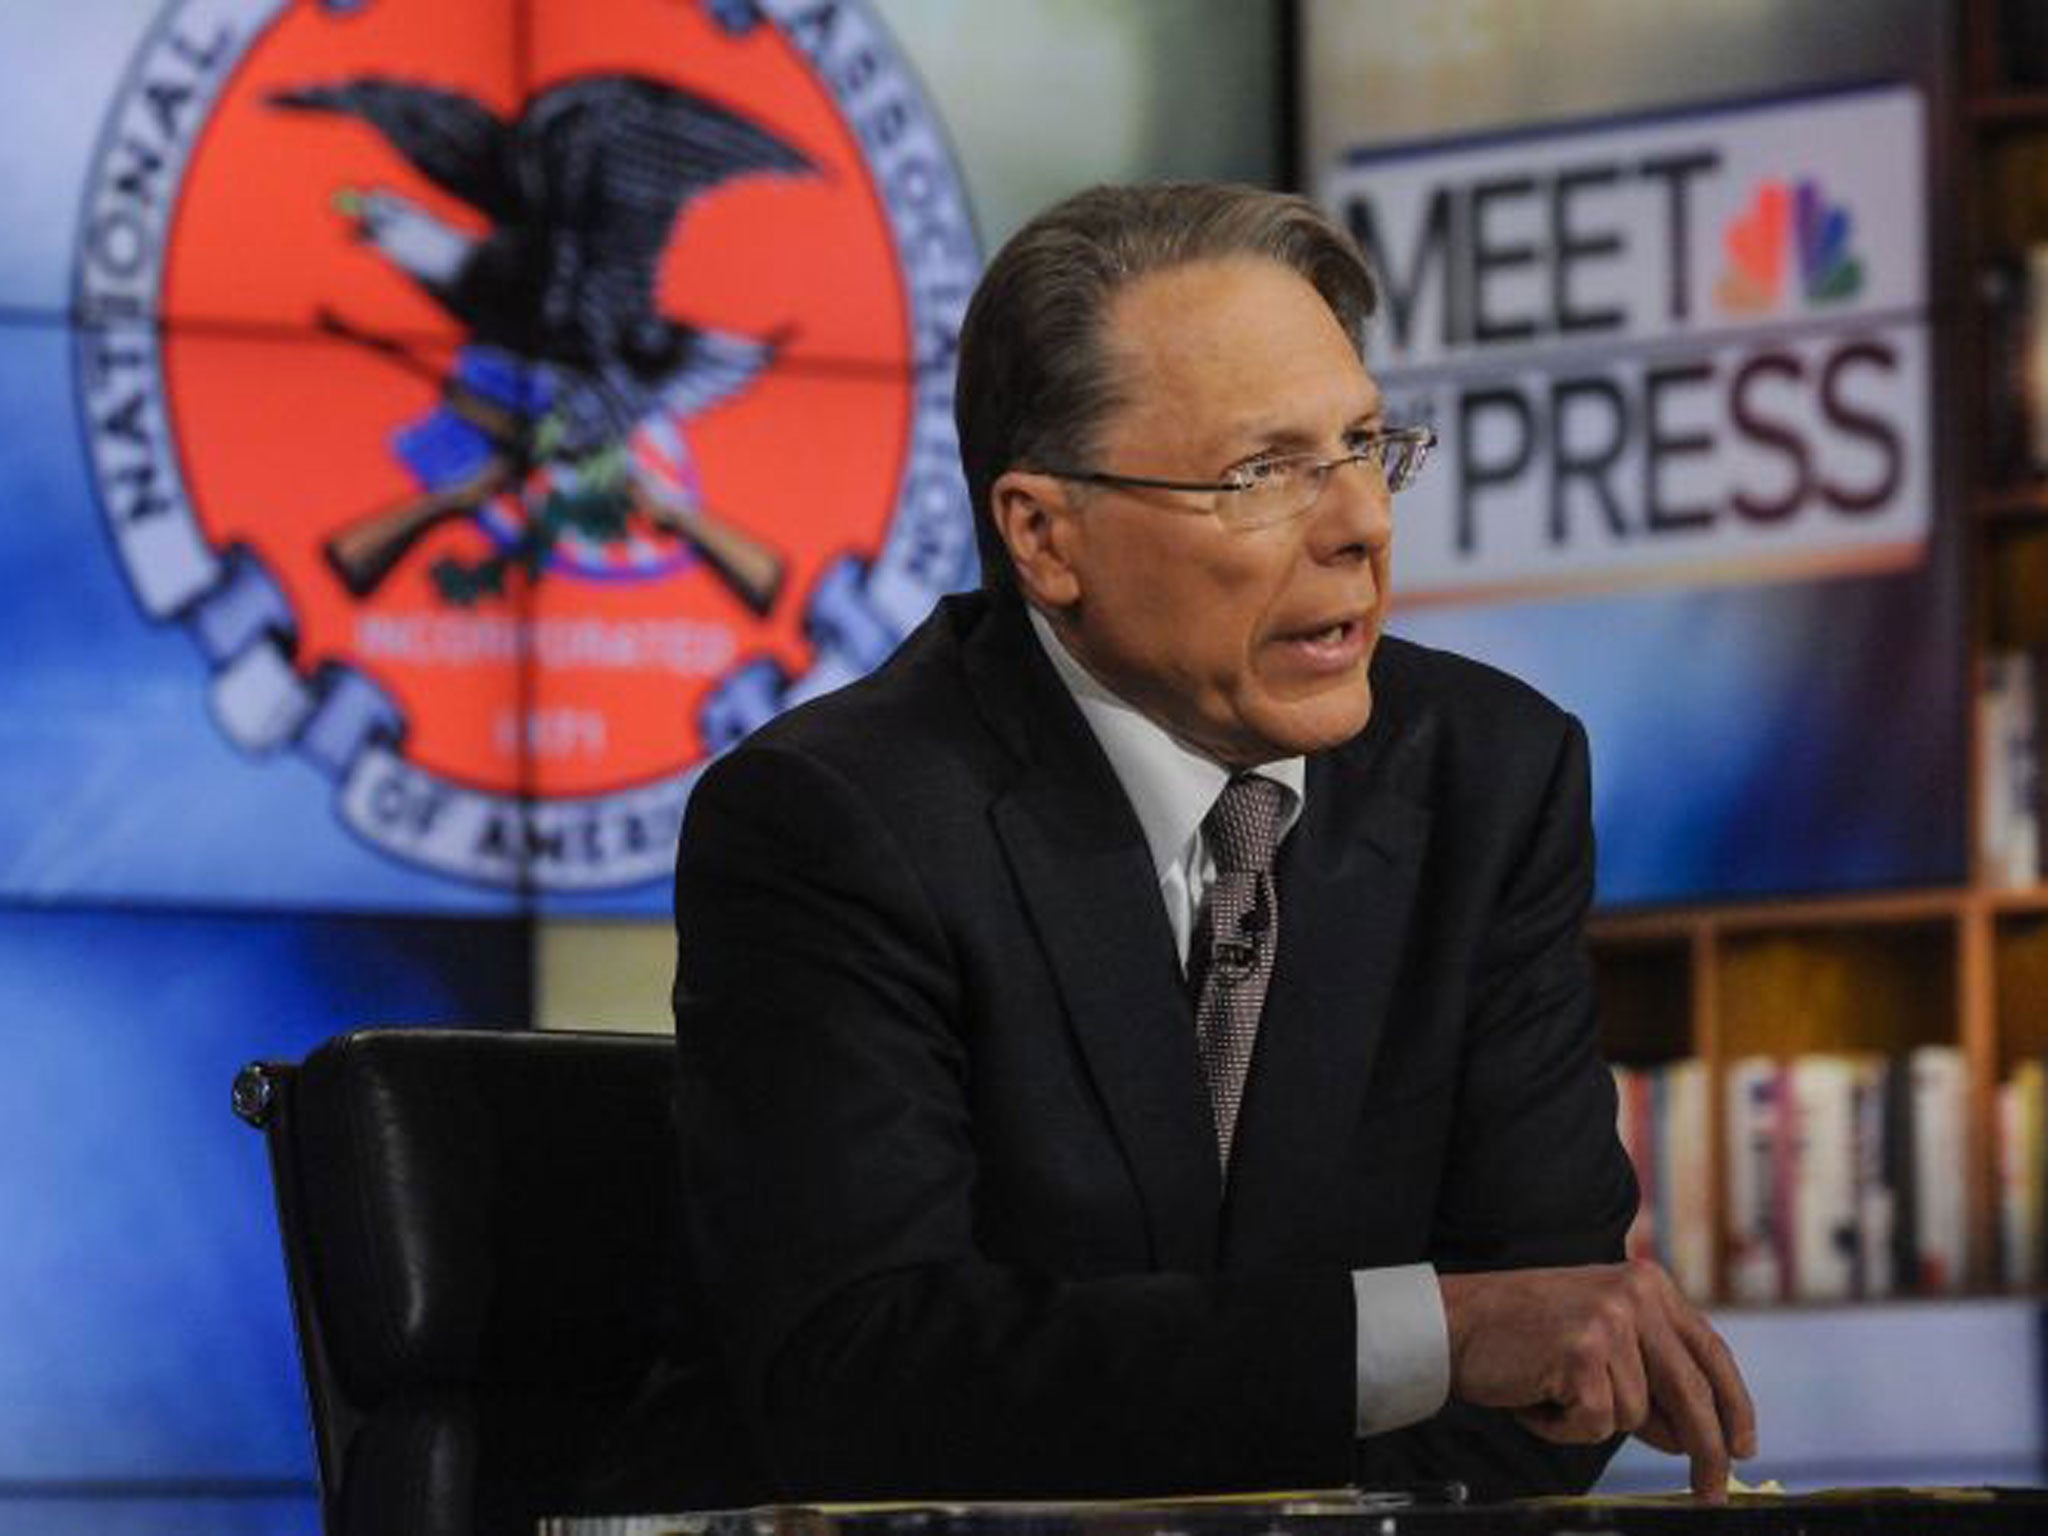 Wayne LaPierre The NRA chief was accused of making a ‘revolting’ and ‘tone-deaf statement'